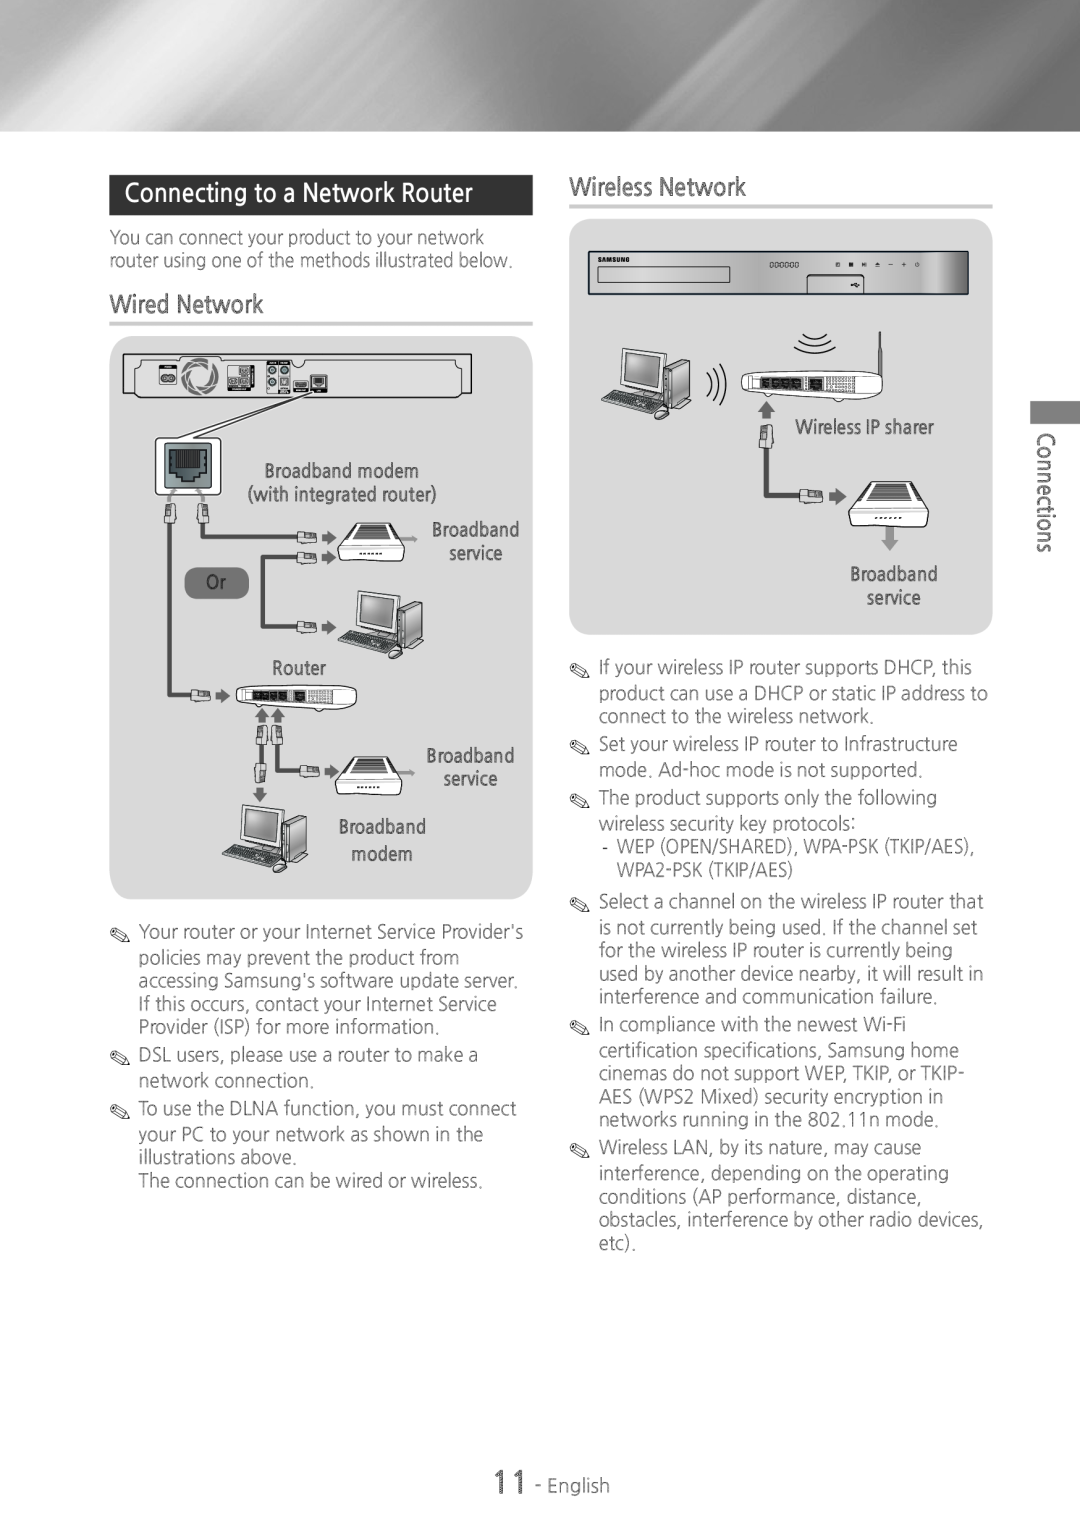 Samsung HT-HS5200, HT-H5200 user manual Connecting to a Network Router, Wired Network, Wireless Network, Connections 